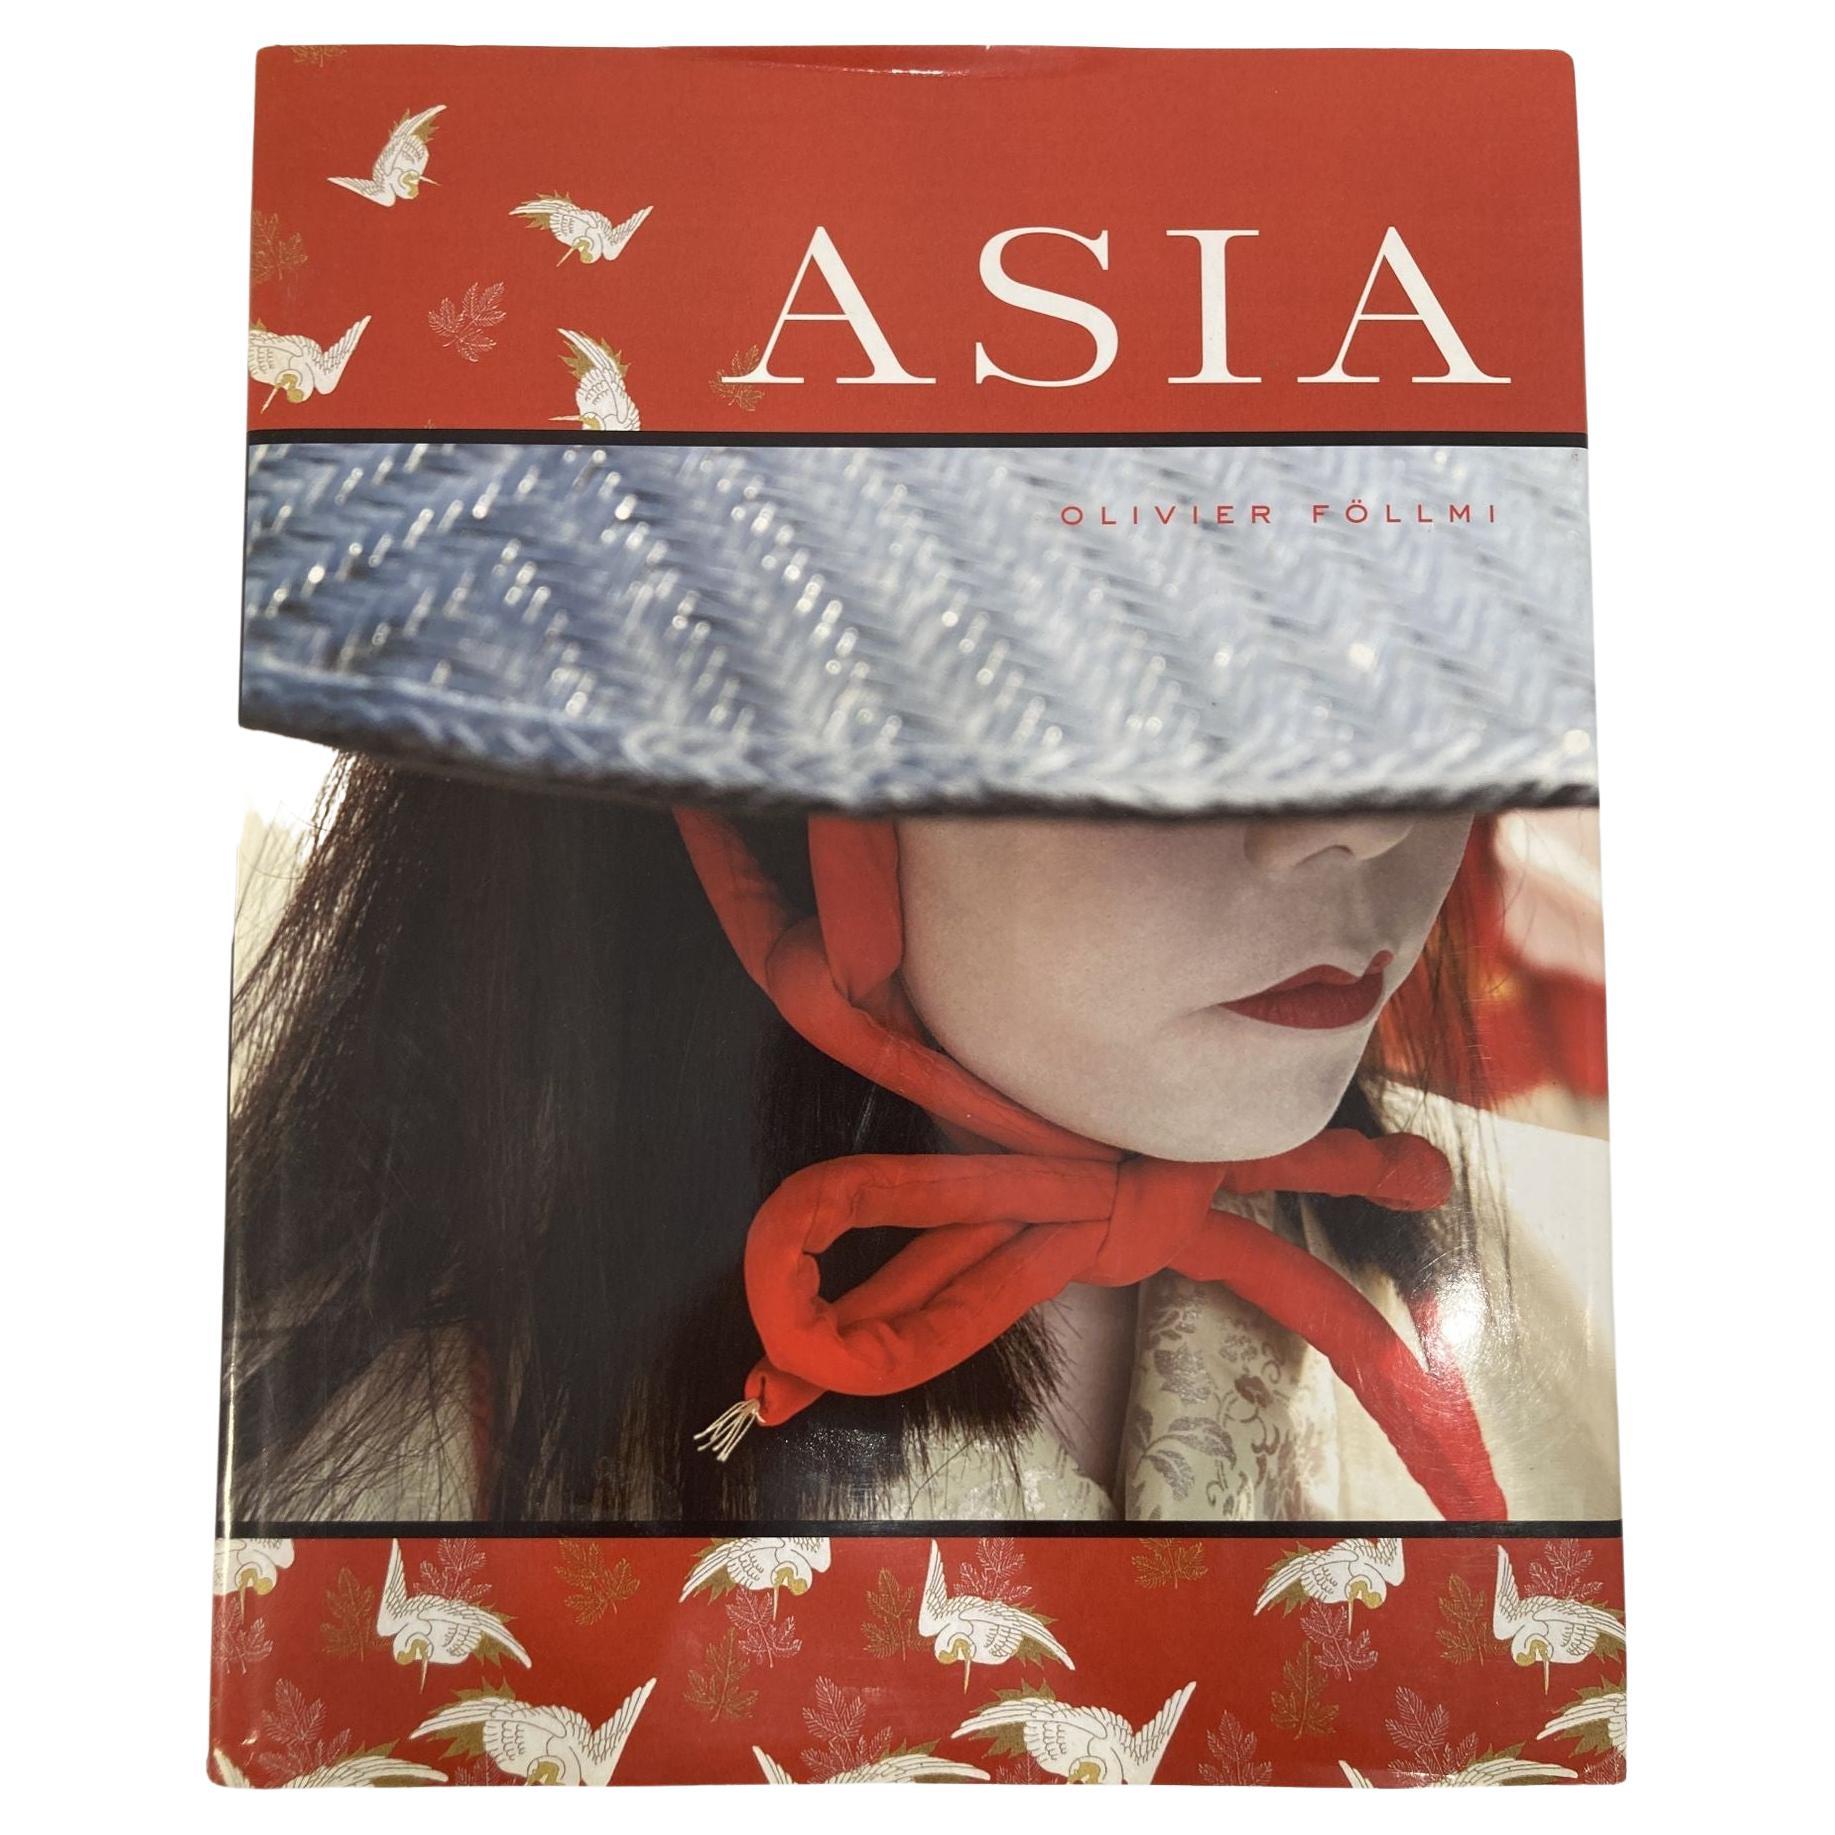 Asia by Olivier Follmi Large Hardcover Book 2008 For Sale